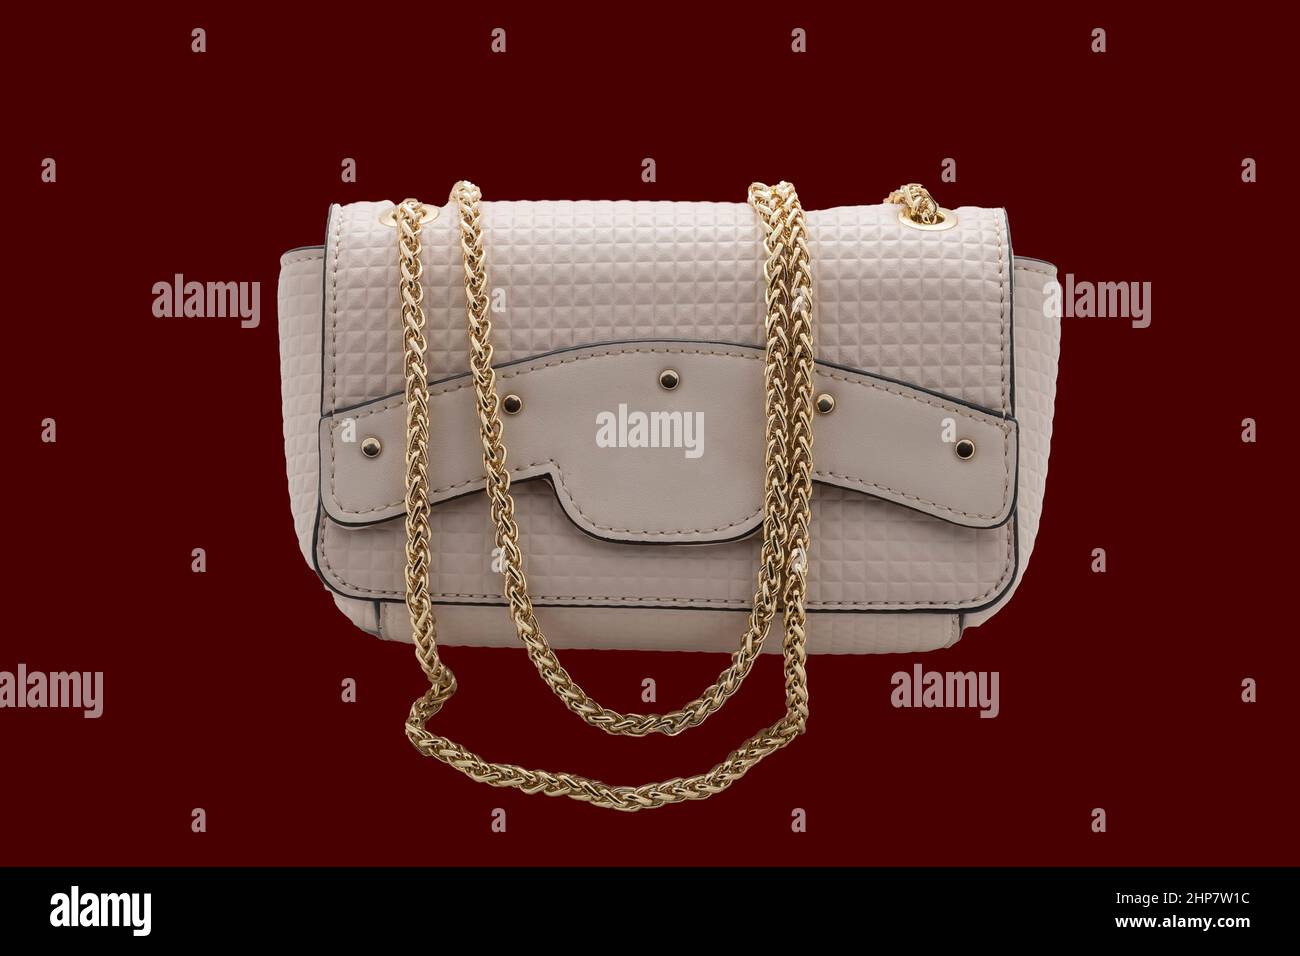 Small women's beige handbag with a gold chain. Photo on a dark background. Stock Photo